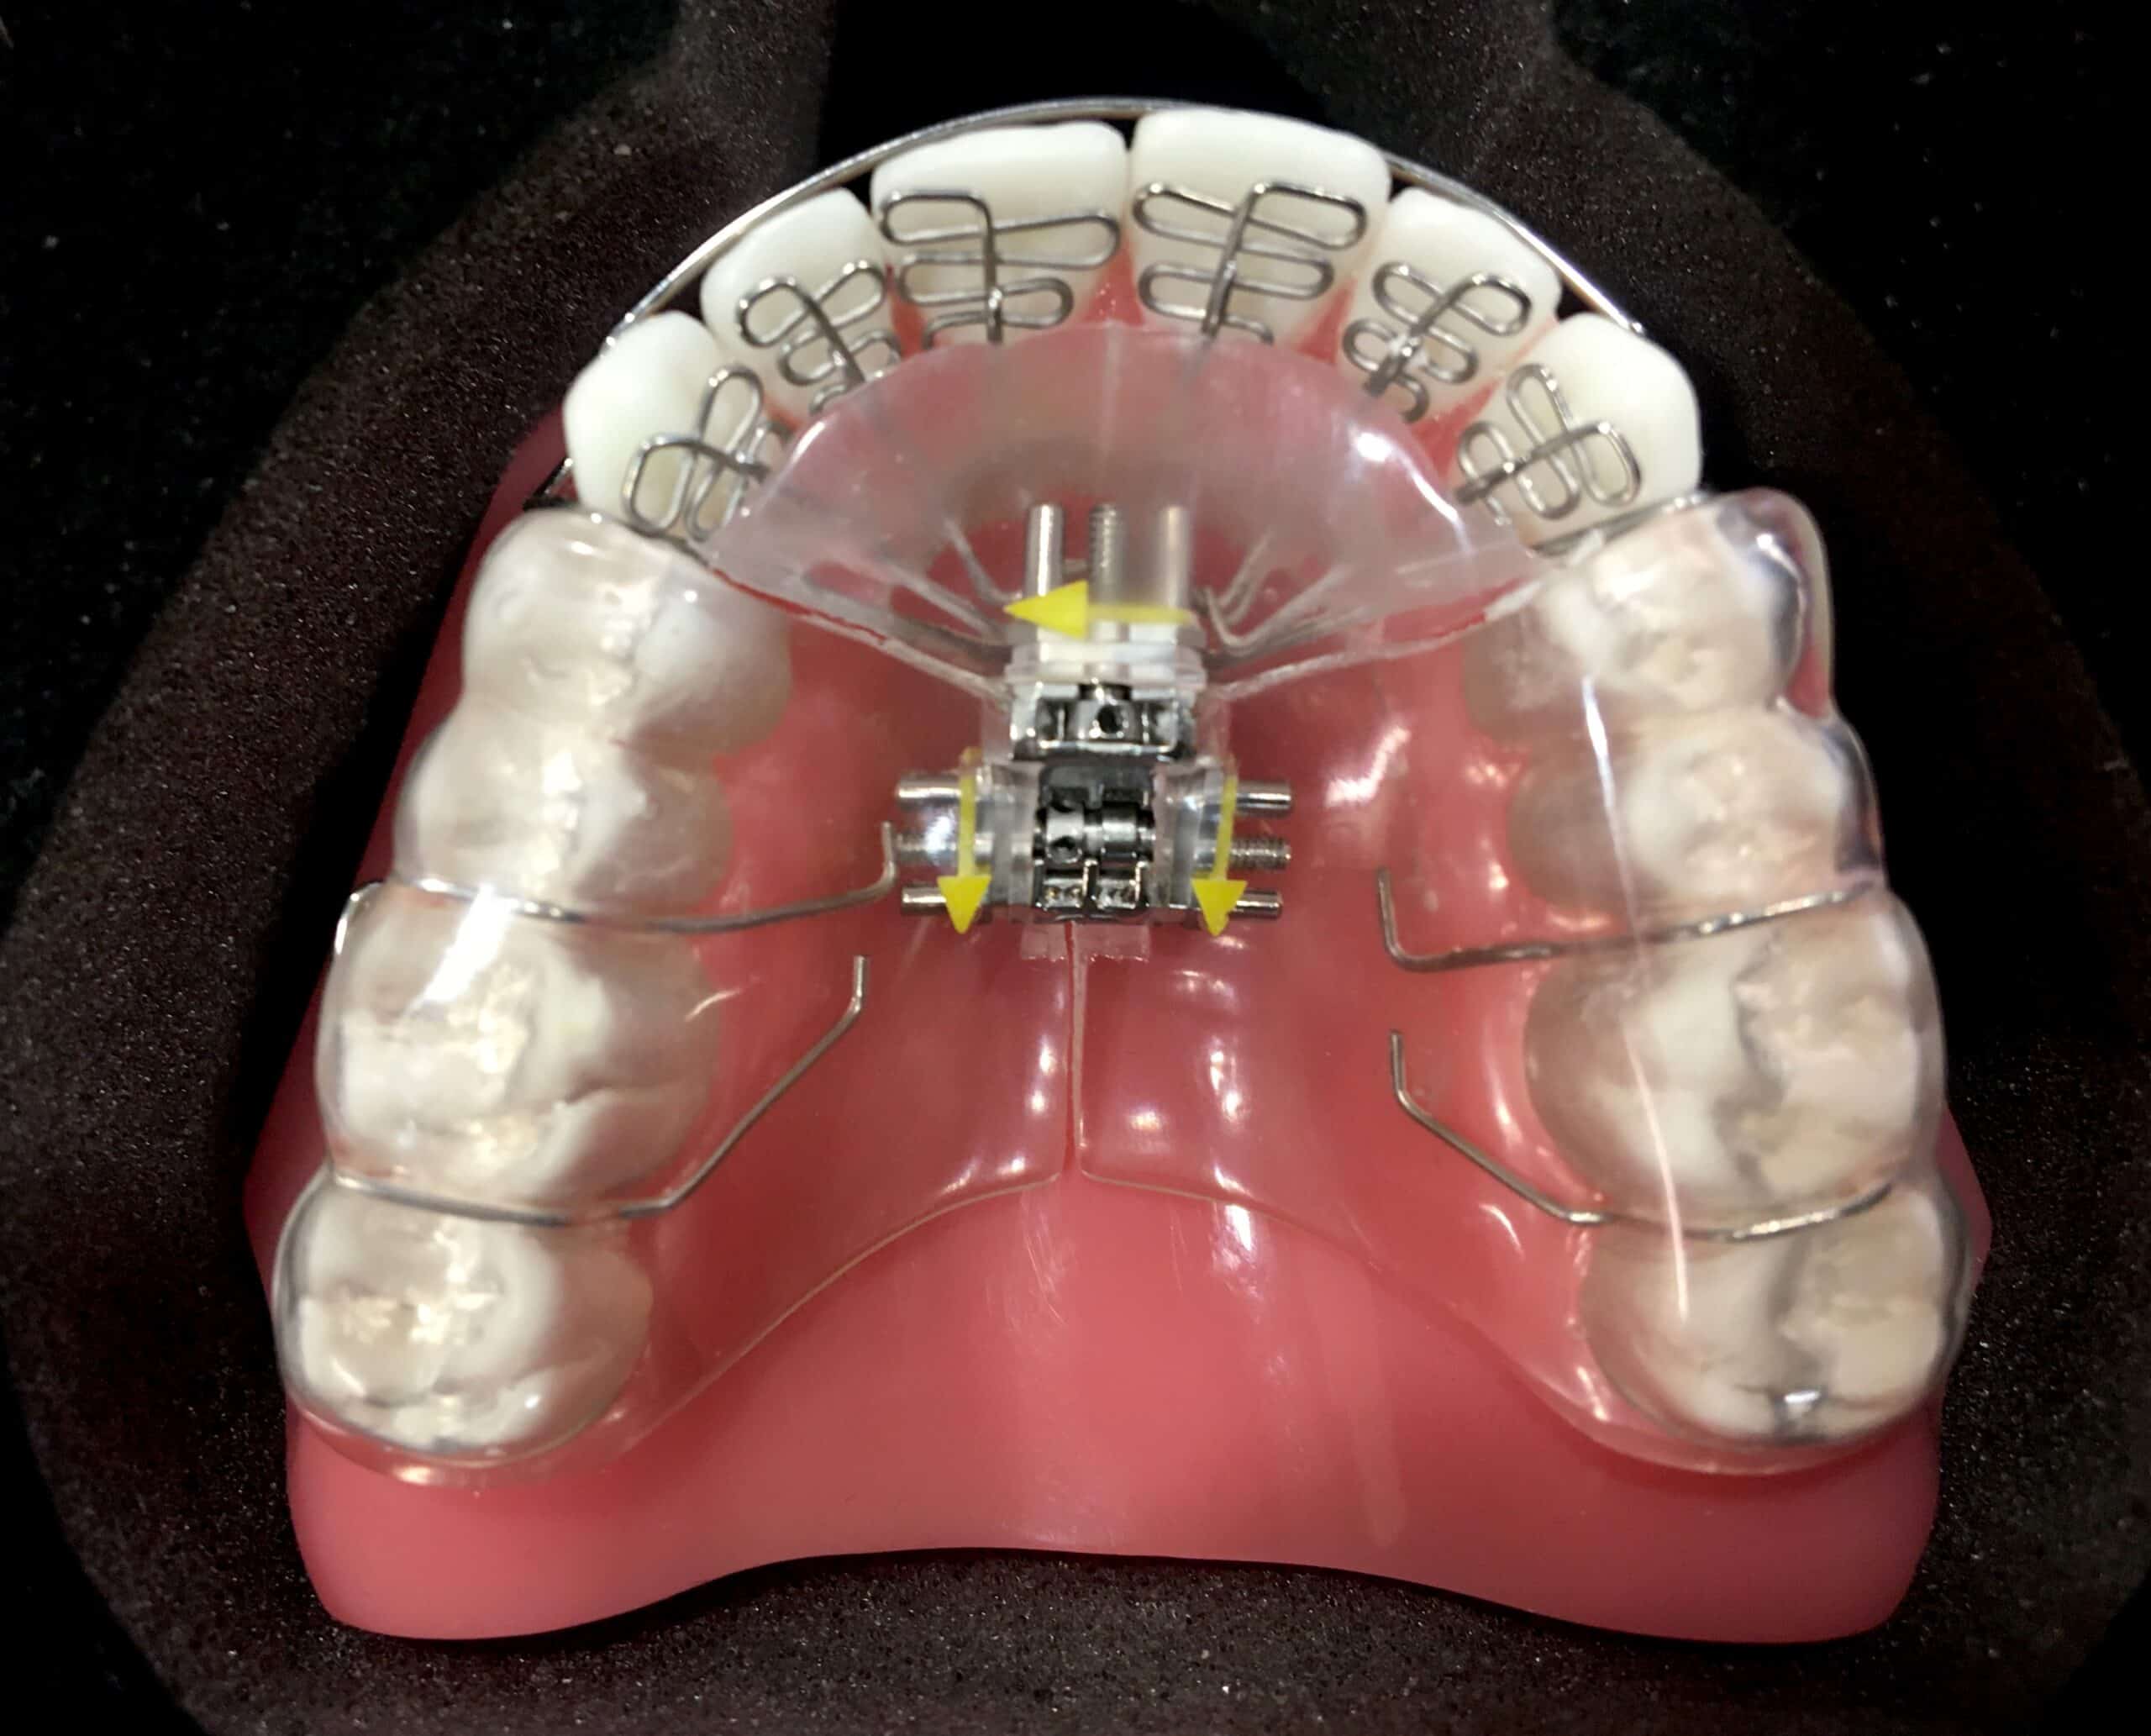 A model of an oral device attached to the roof of the mouth